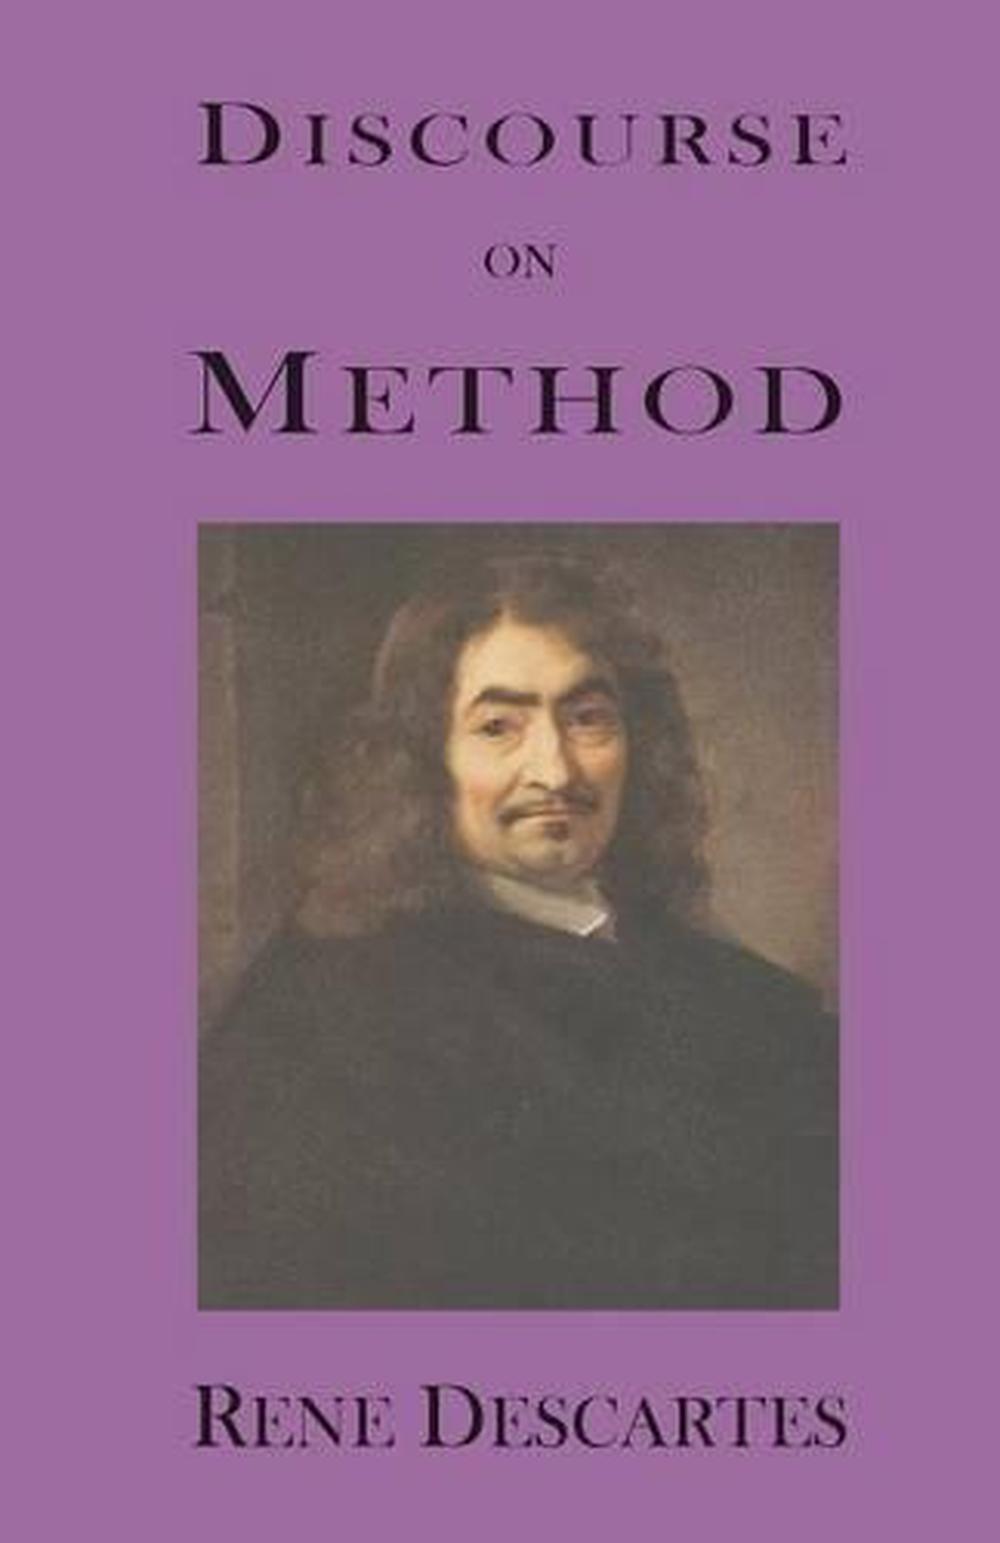 rené descartes discourse on method and related writings